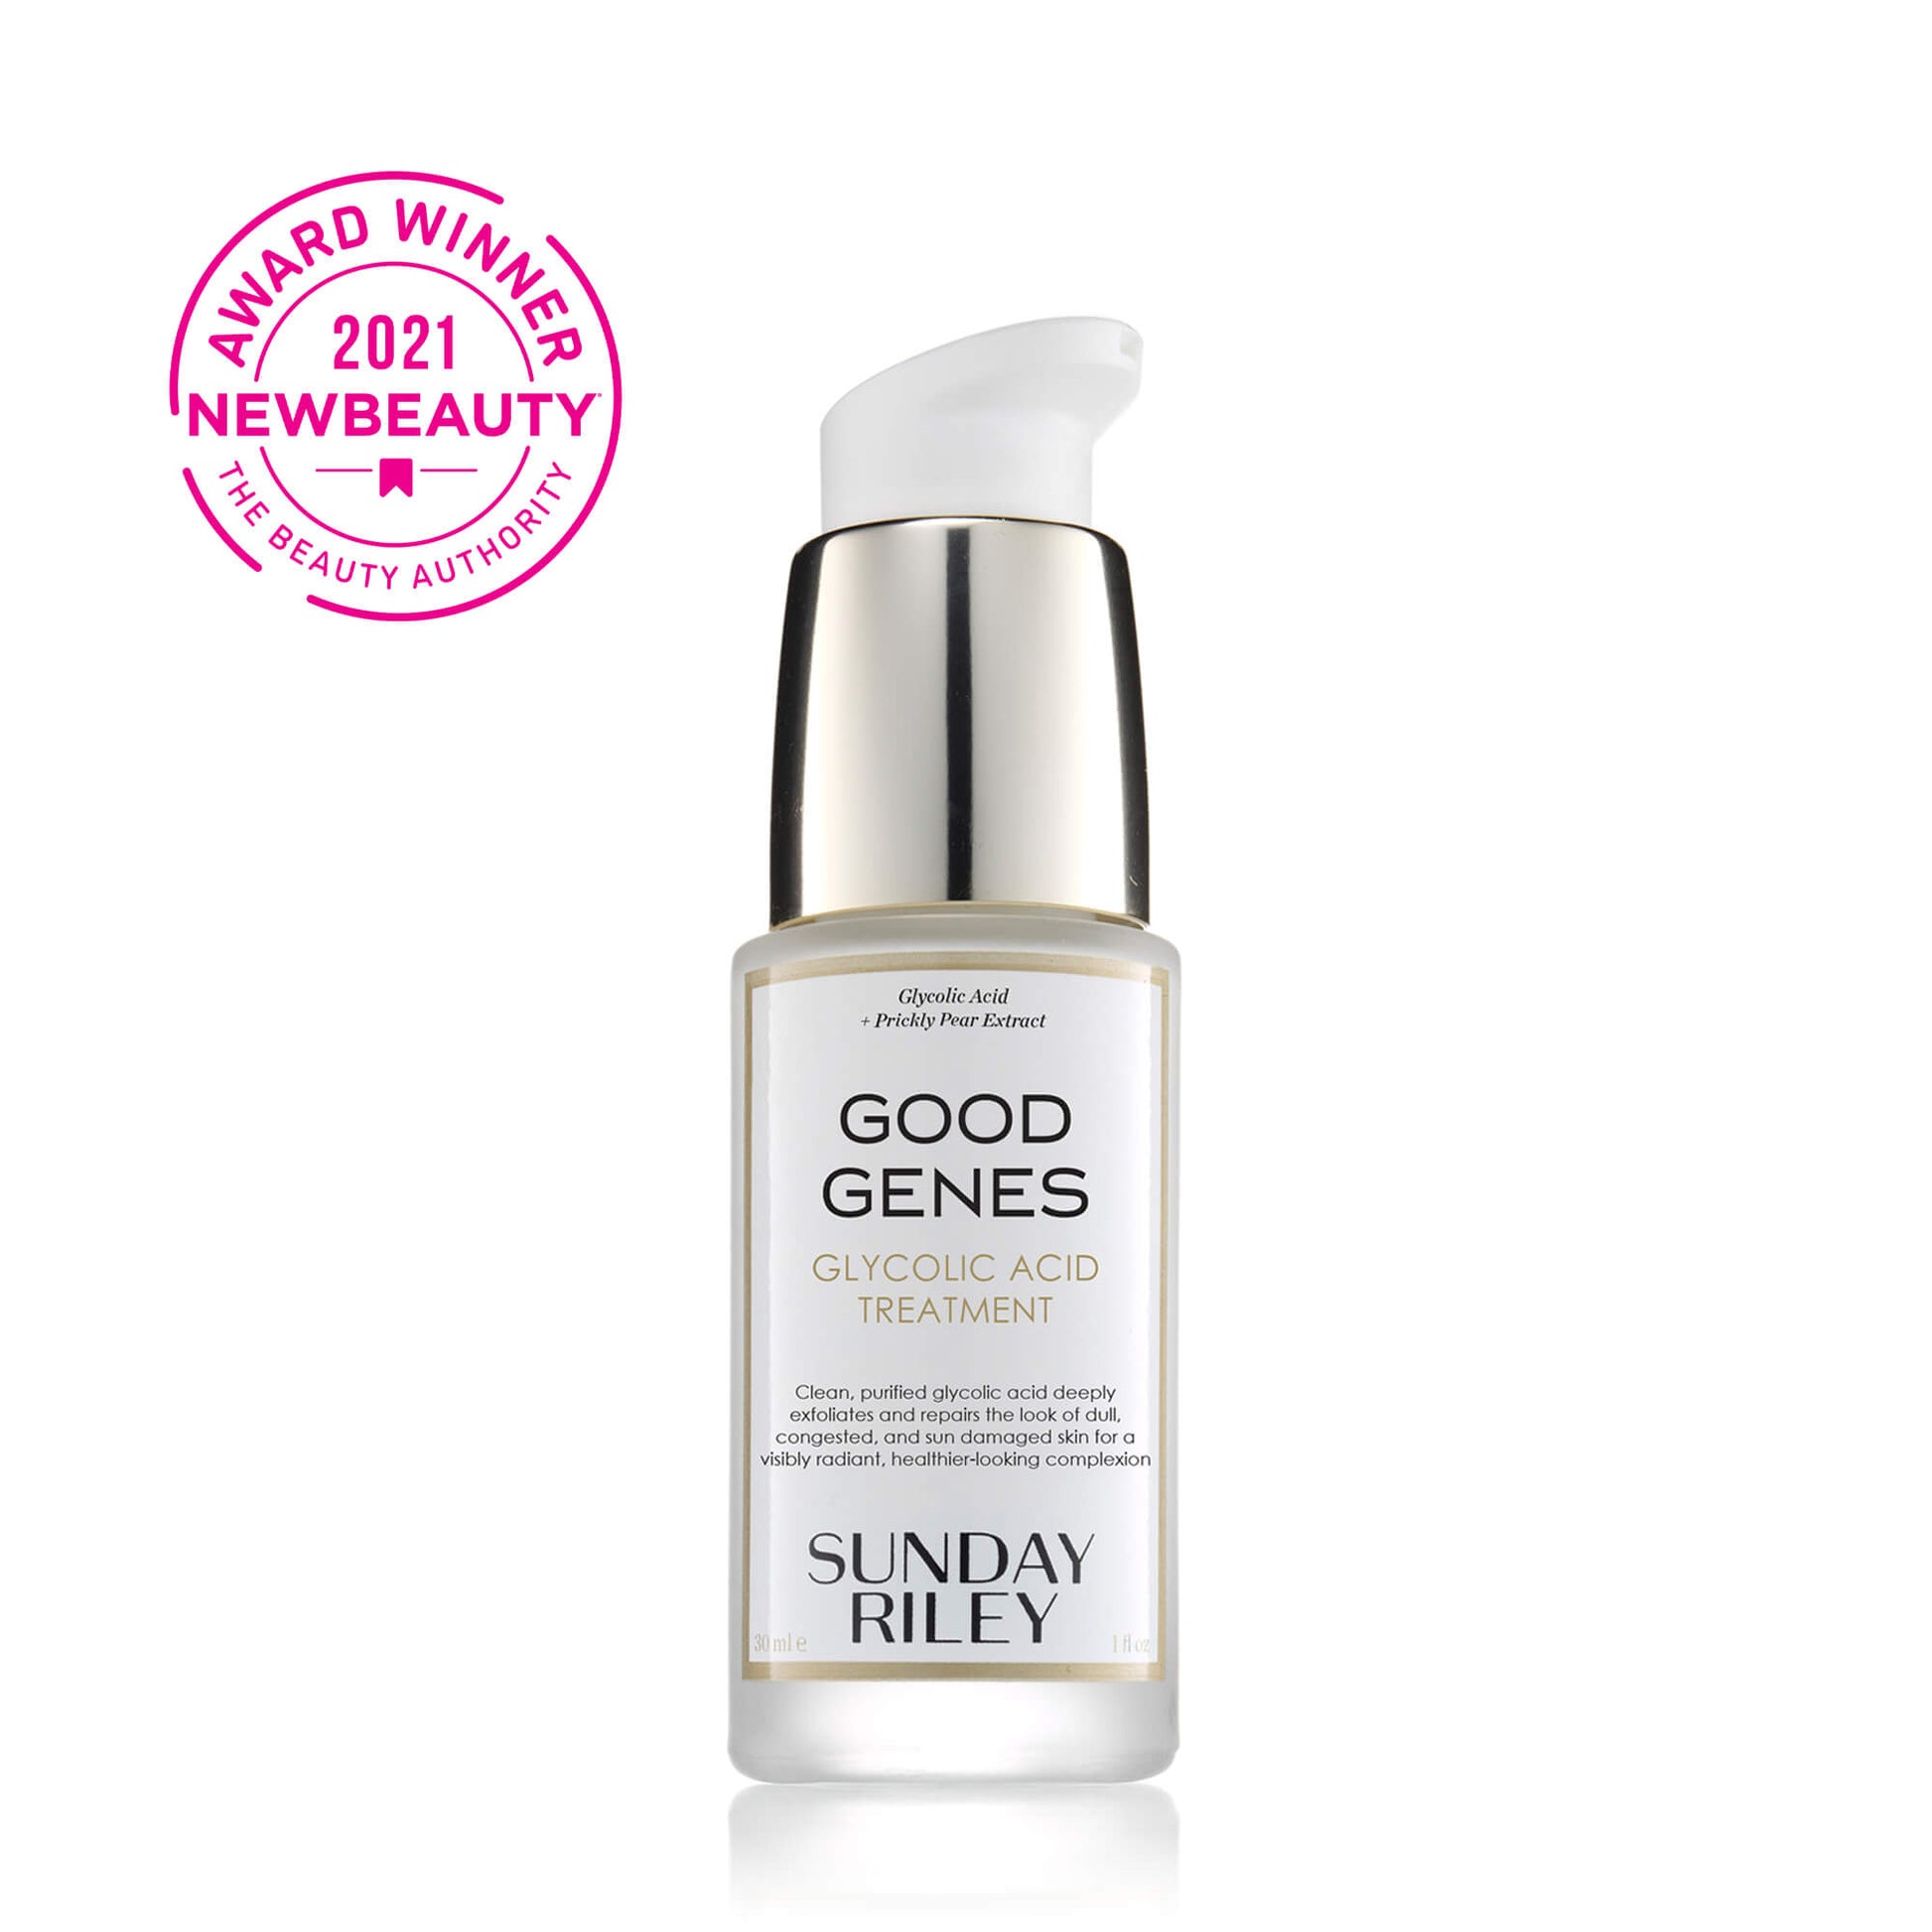 Good Genes Glycolic 30ml pack shot with 2021 NEW BEAUTY - THE BEAUTY AUTHORITY AWARD WINNER BADGE